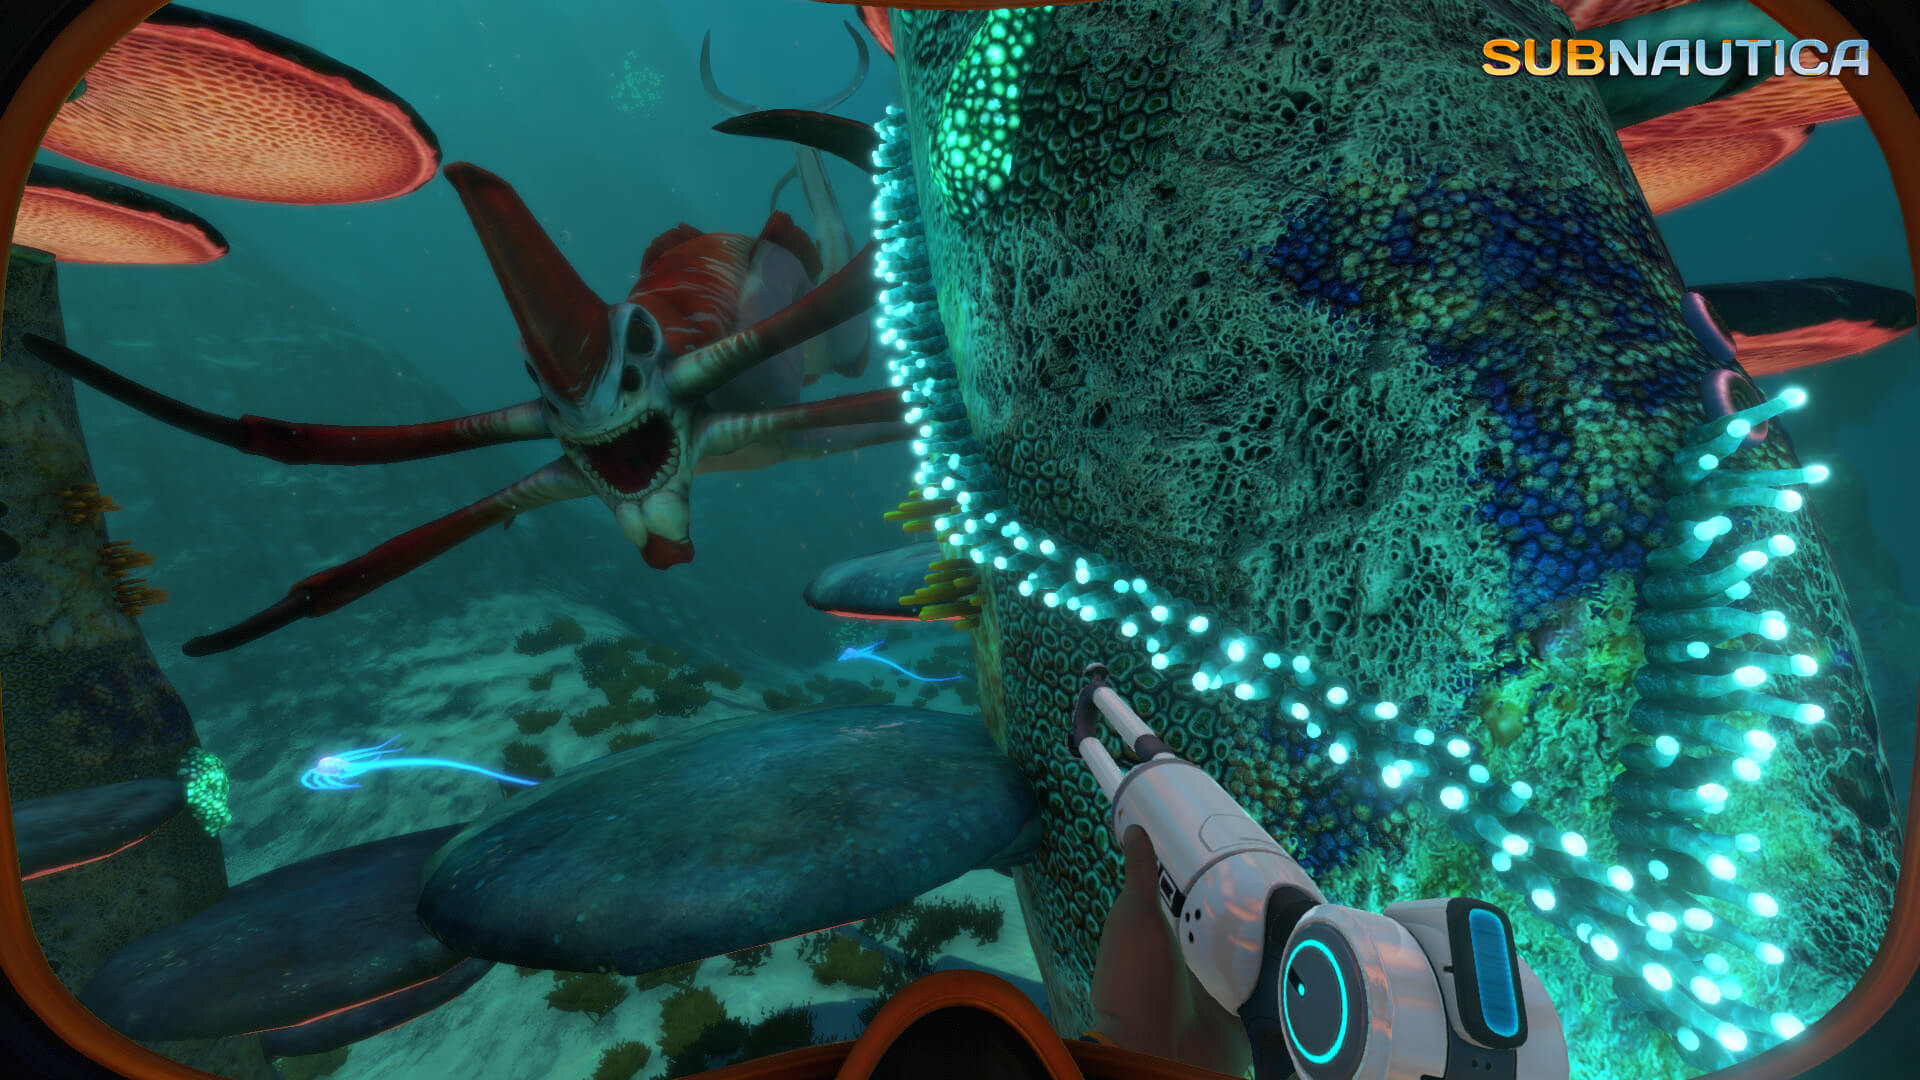 A Reaper Leviathan swimming through the water in Subnautica